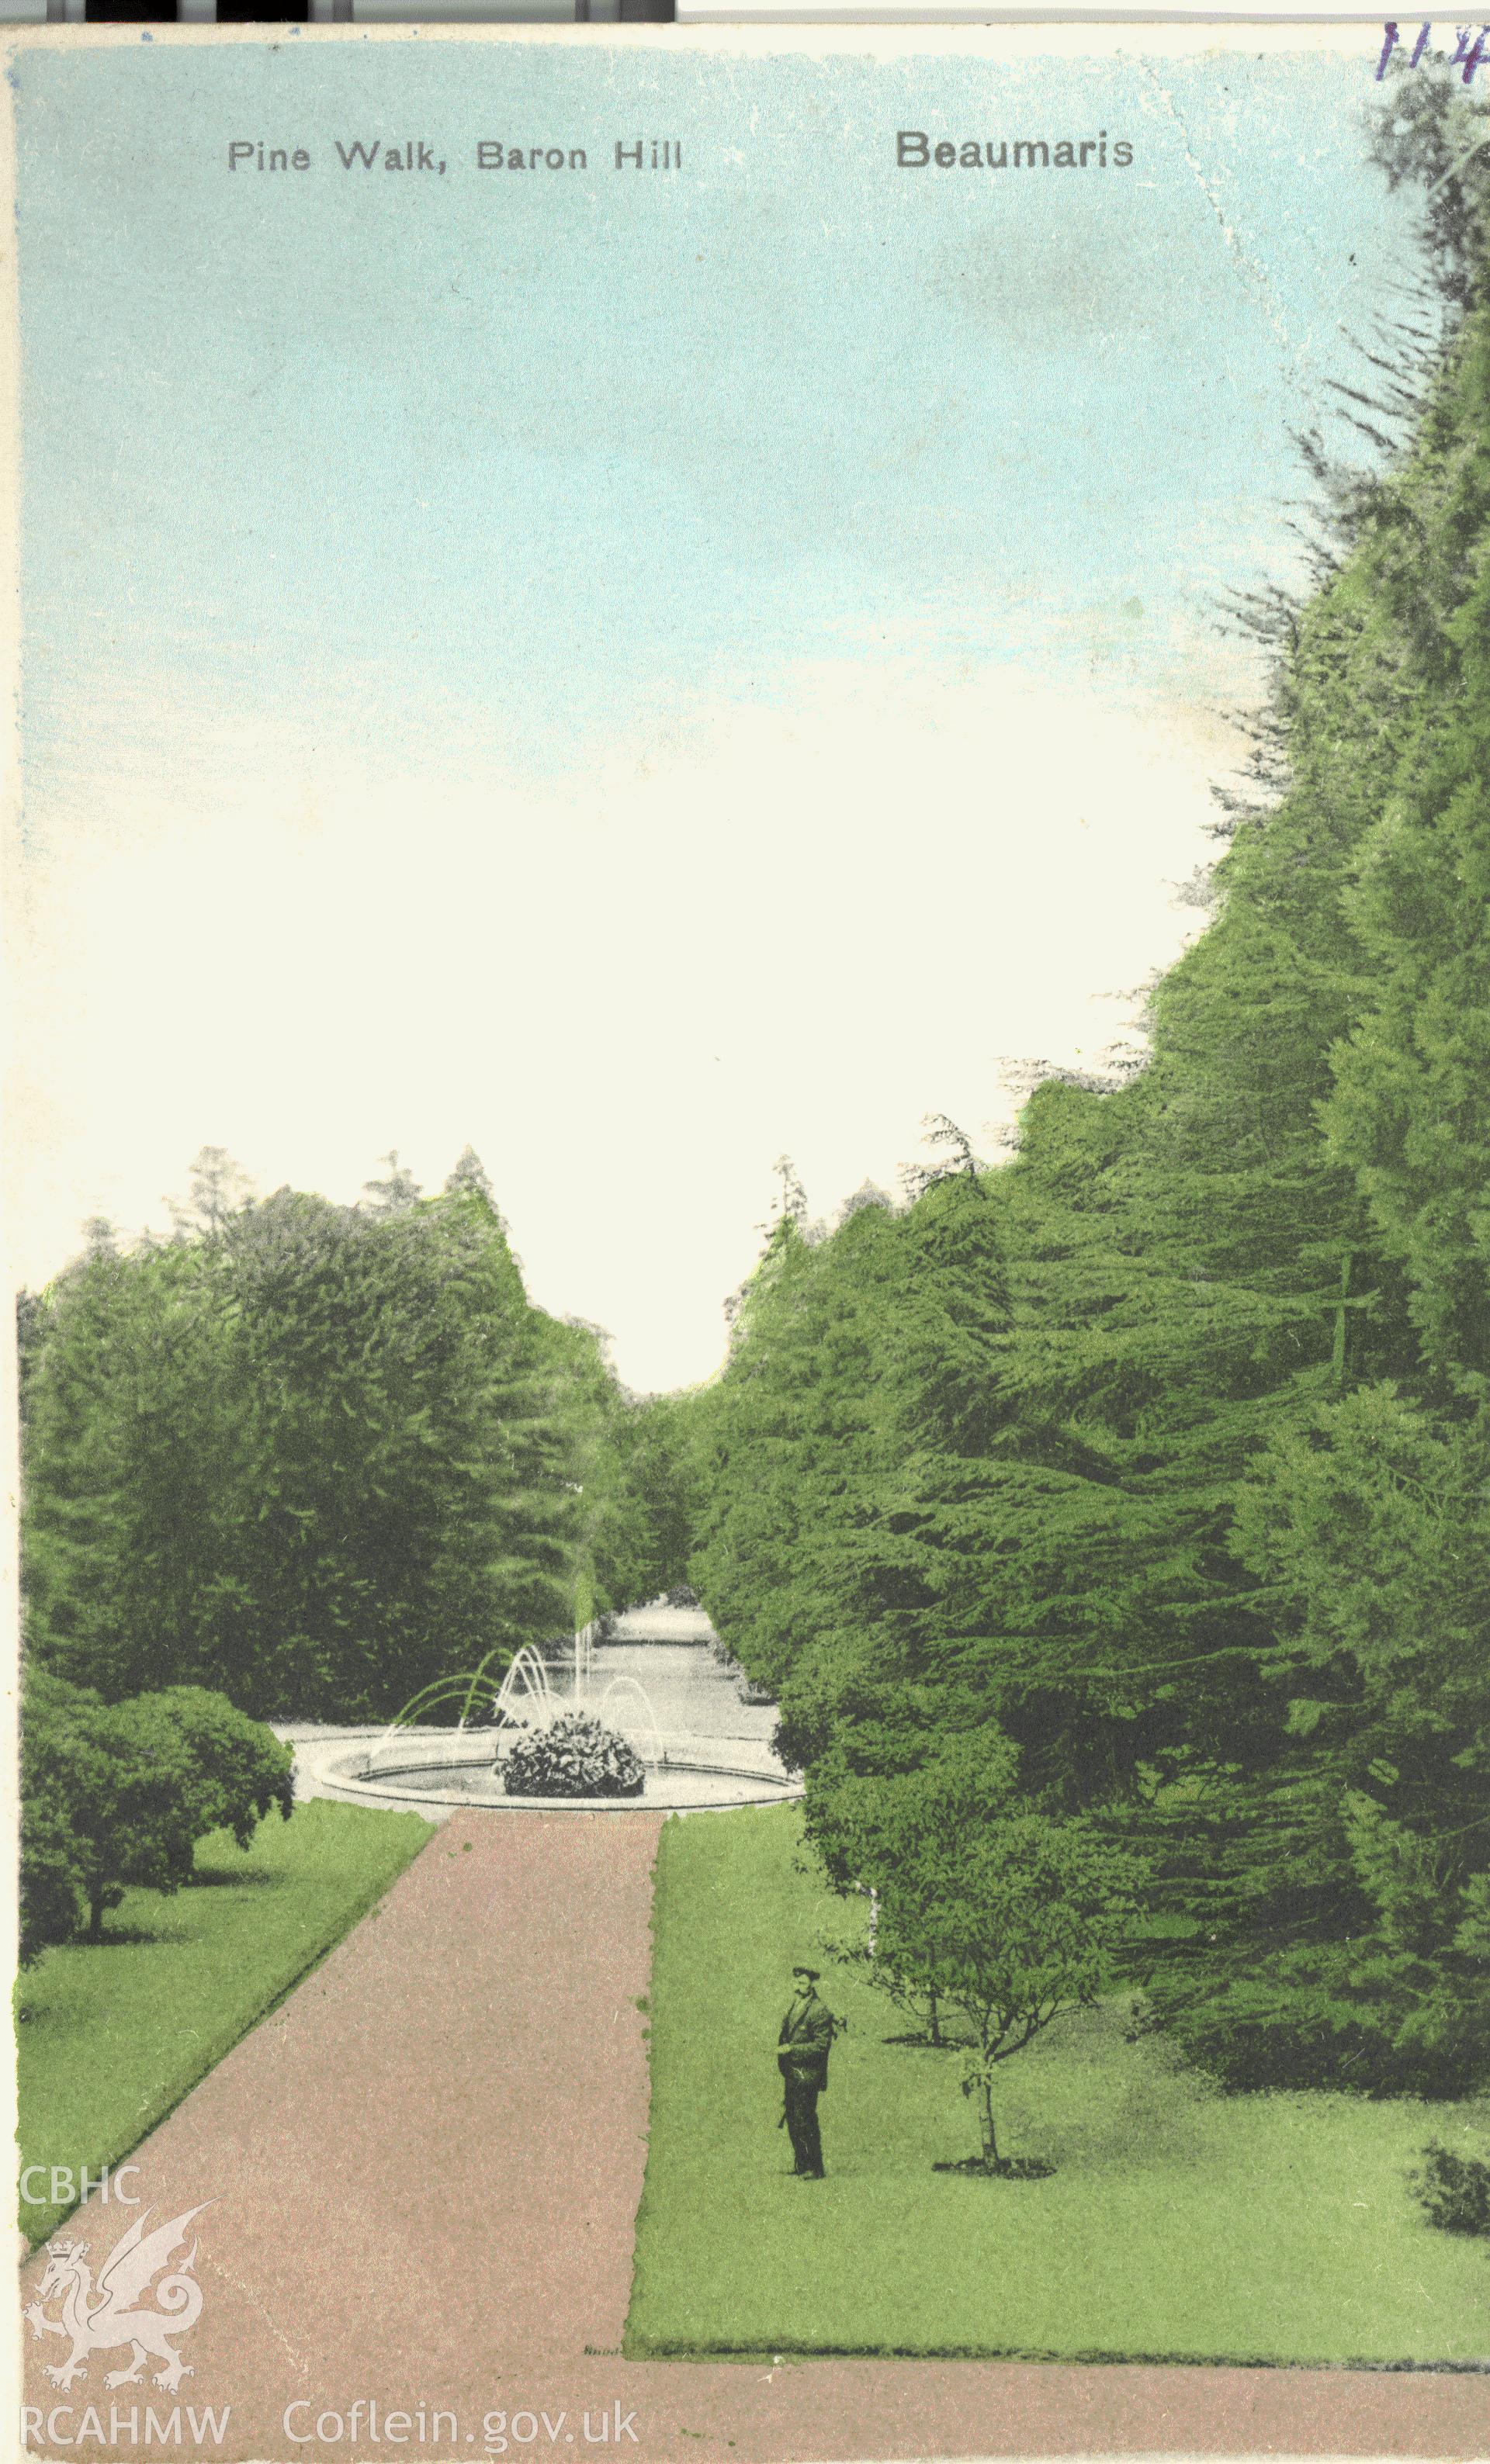 Digitised postcard image of Baron Hill Gardens, Beaumaris, Stewart and Woolf. Produced by Parks and Gardens Data Services, from an original item in the Peter Davis Collection at Parks and Gardens UK. We hold only web-resolution images of this collection, suitable for viewing on screen and for research purposes only. We do not hold the original images, or publication quality scans.